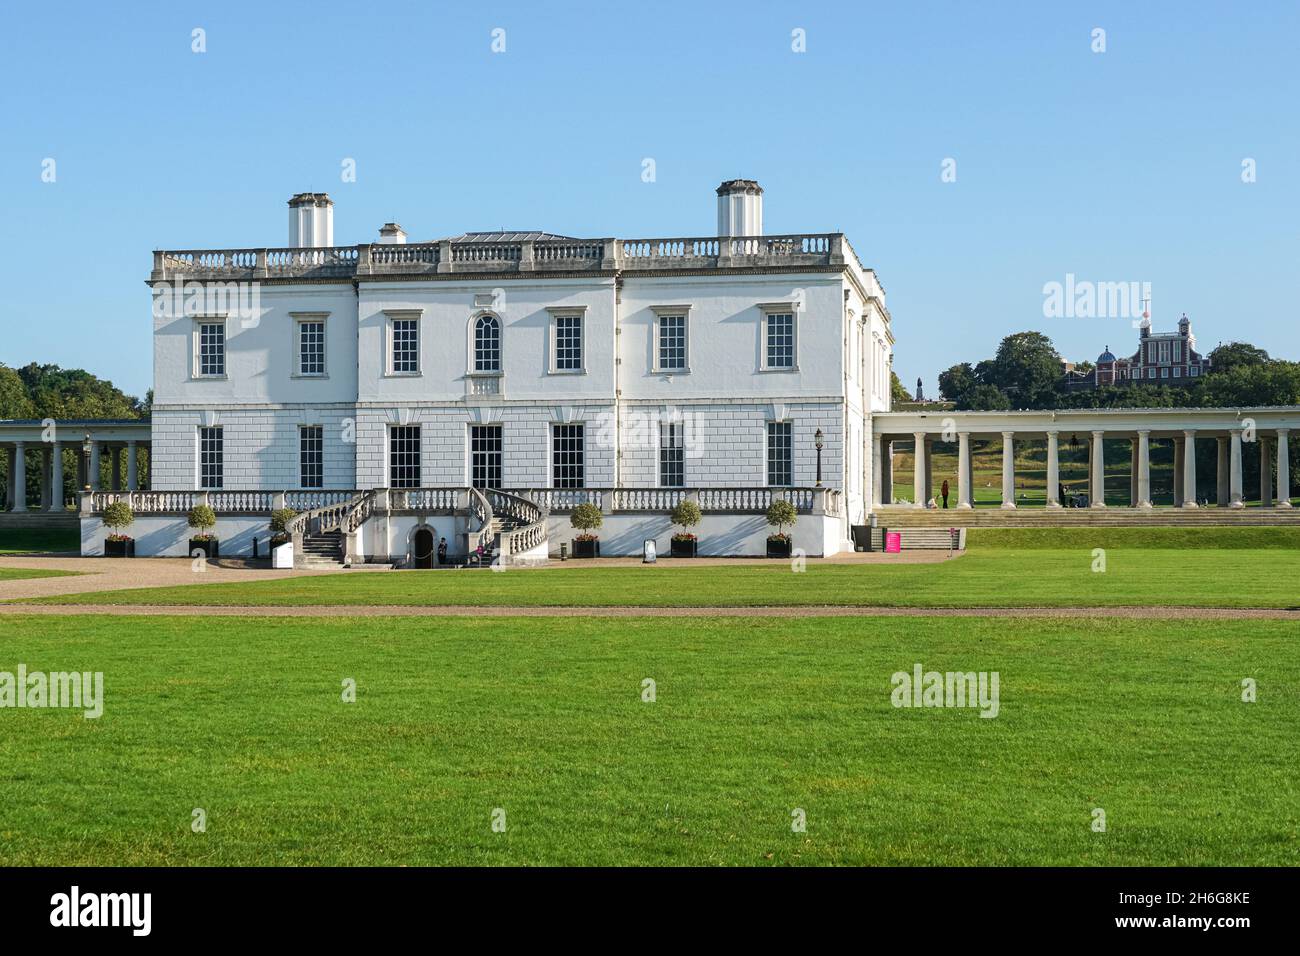 Queen's House, former royal residence in Greenwich, London, England, United Kingdom, UK Stock Photo